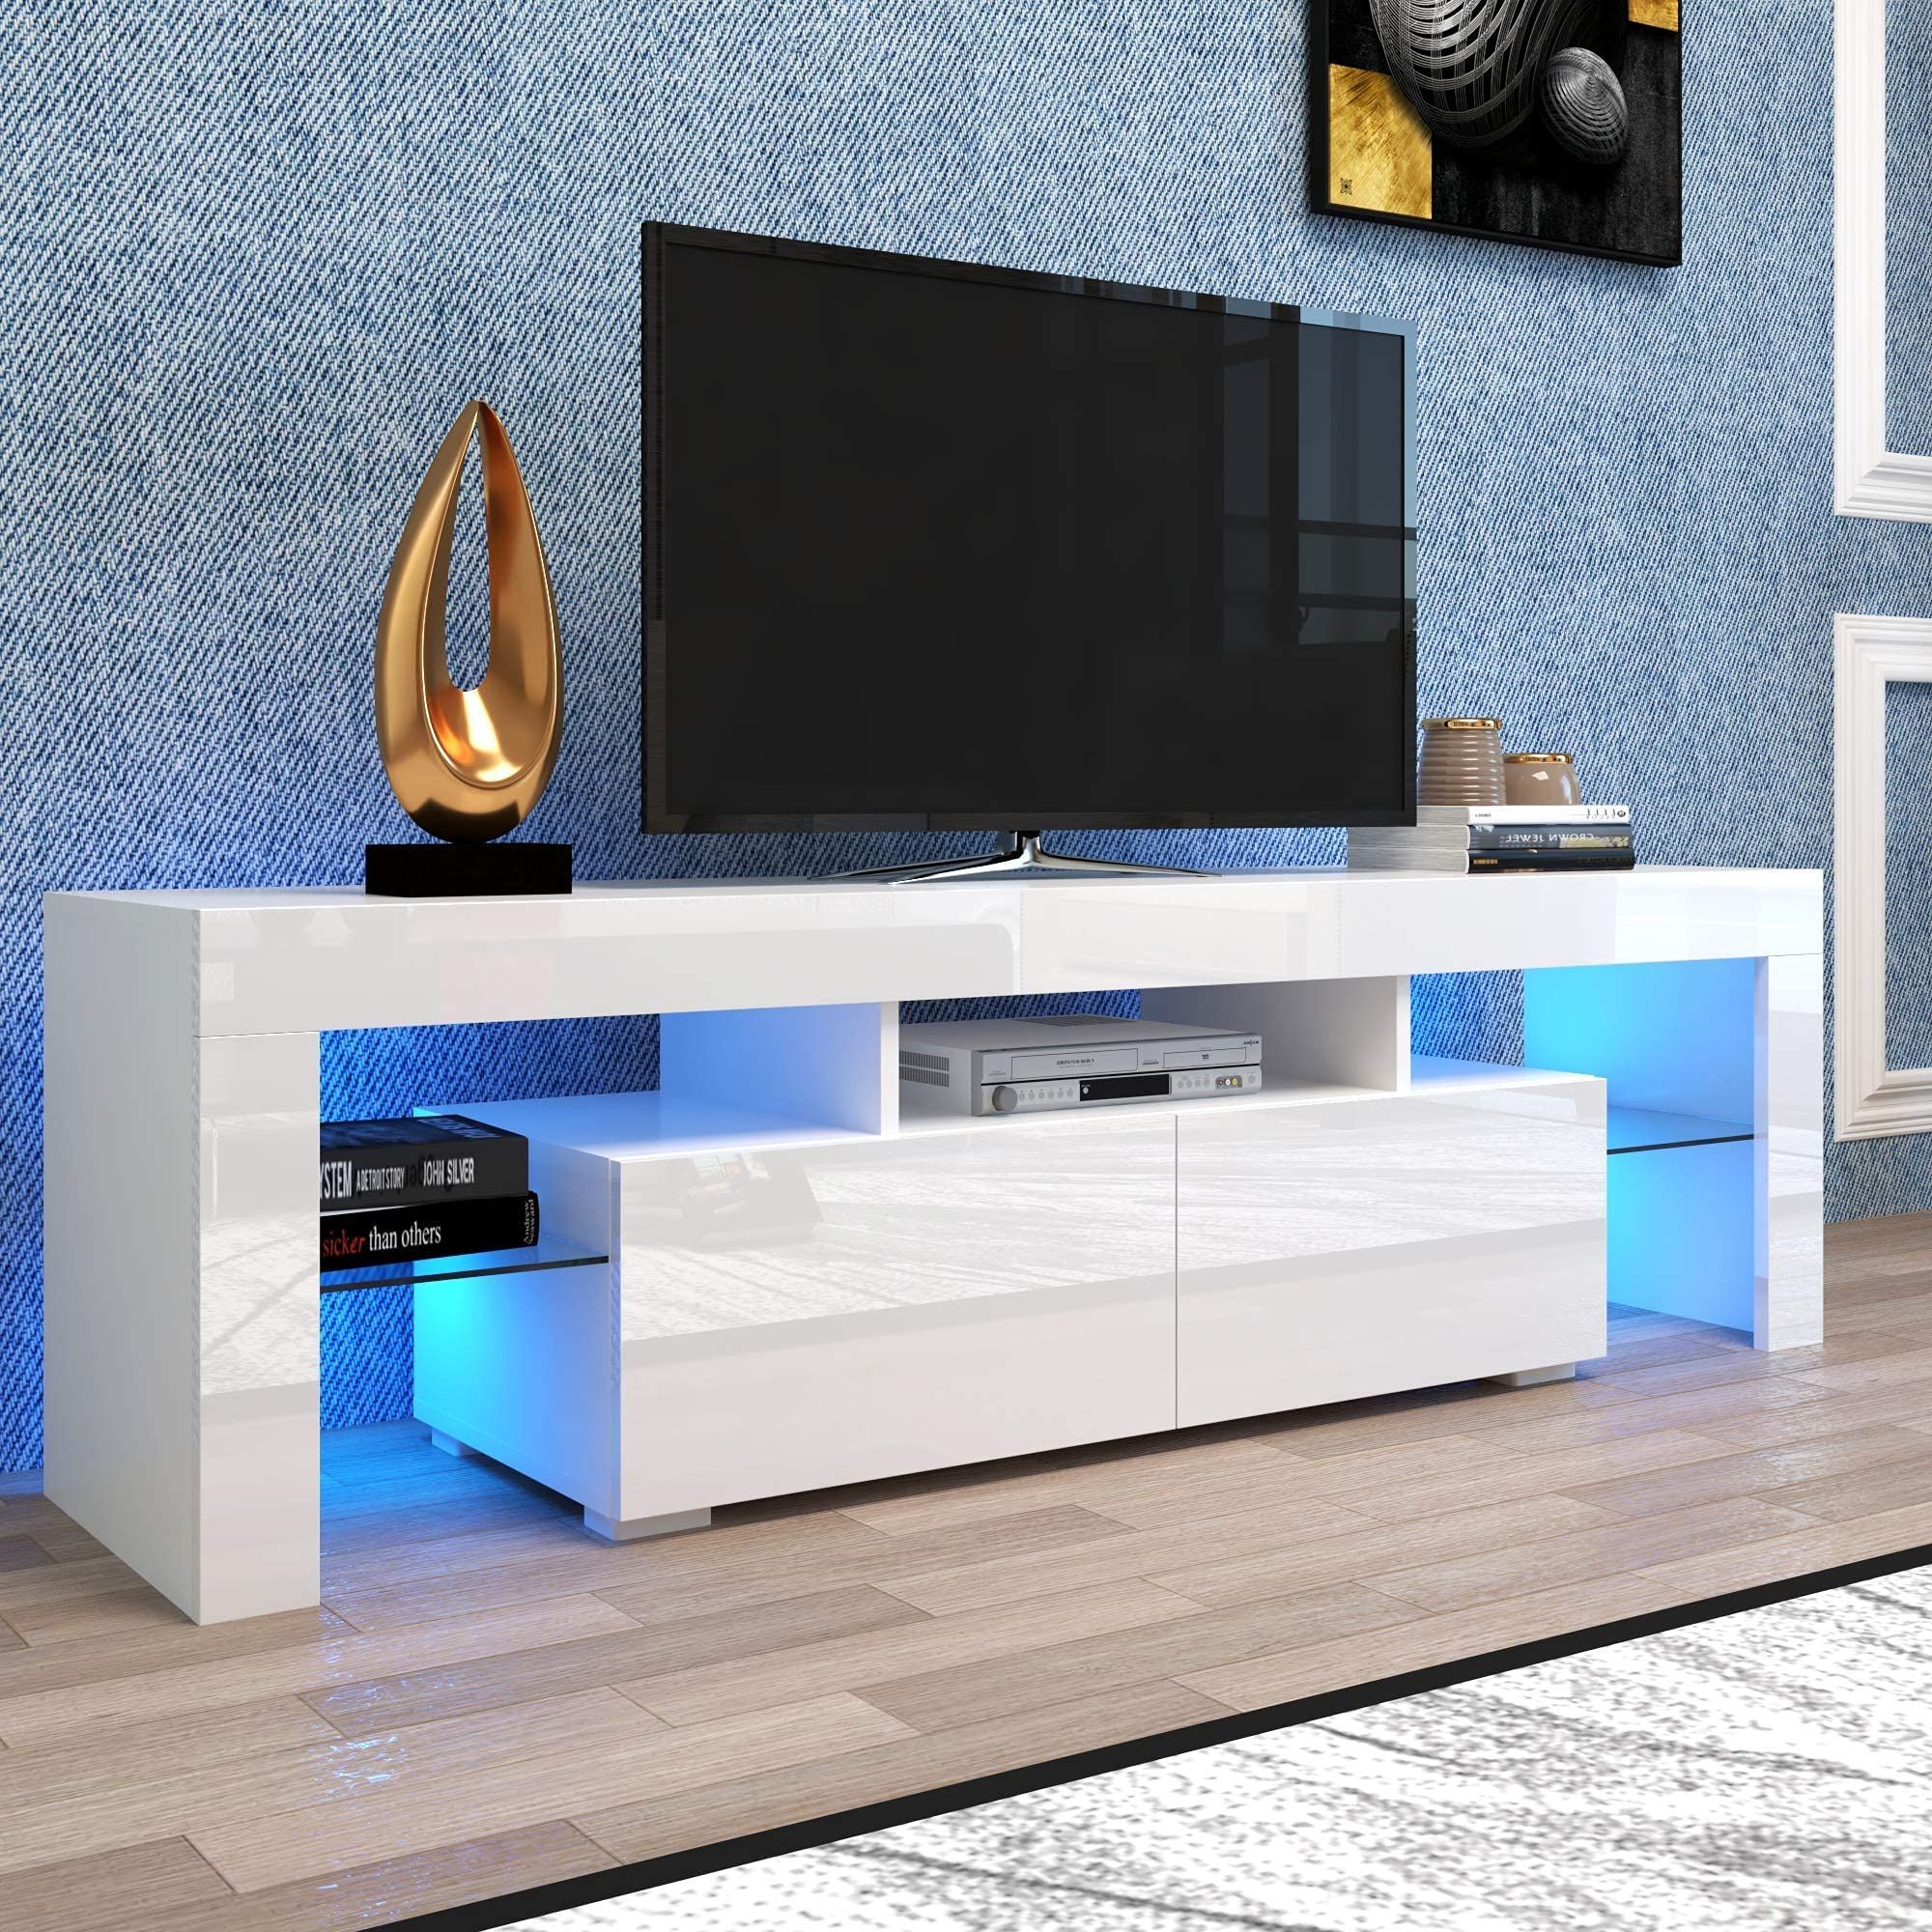 Rgb Tv Entertainment Centers Intended For Latest Buy Ssline Glossy Led Tv Stand With 16 Colors Rgb Led Lights,modern (View 9 of 15)